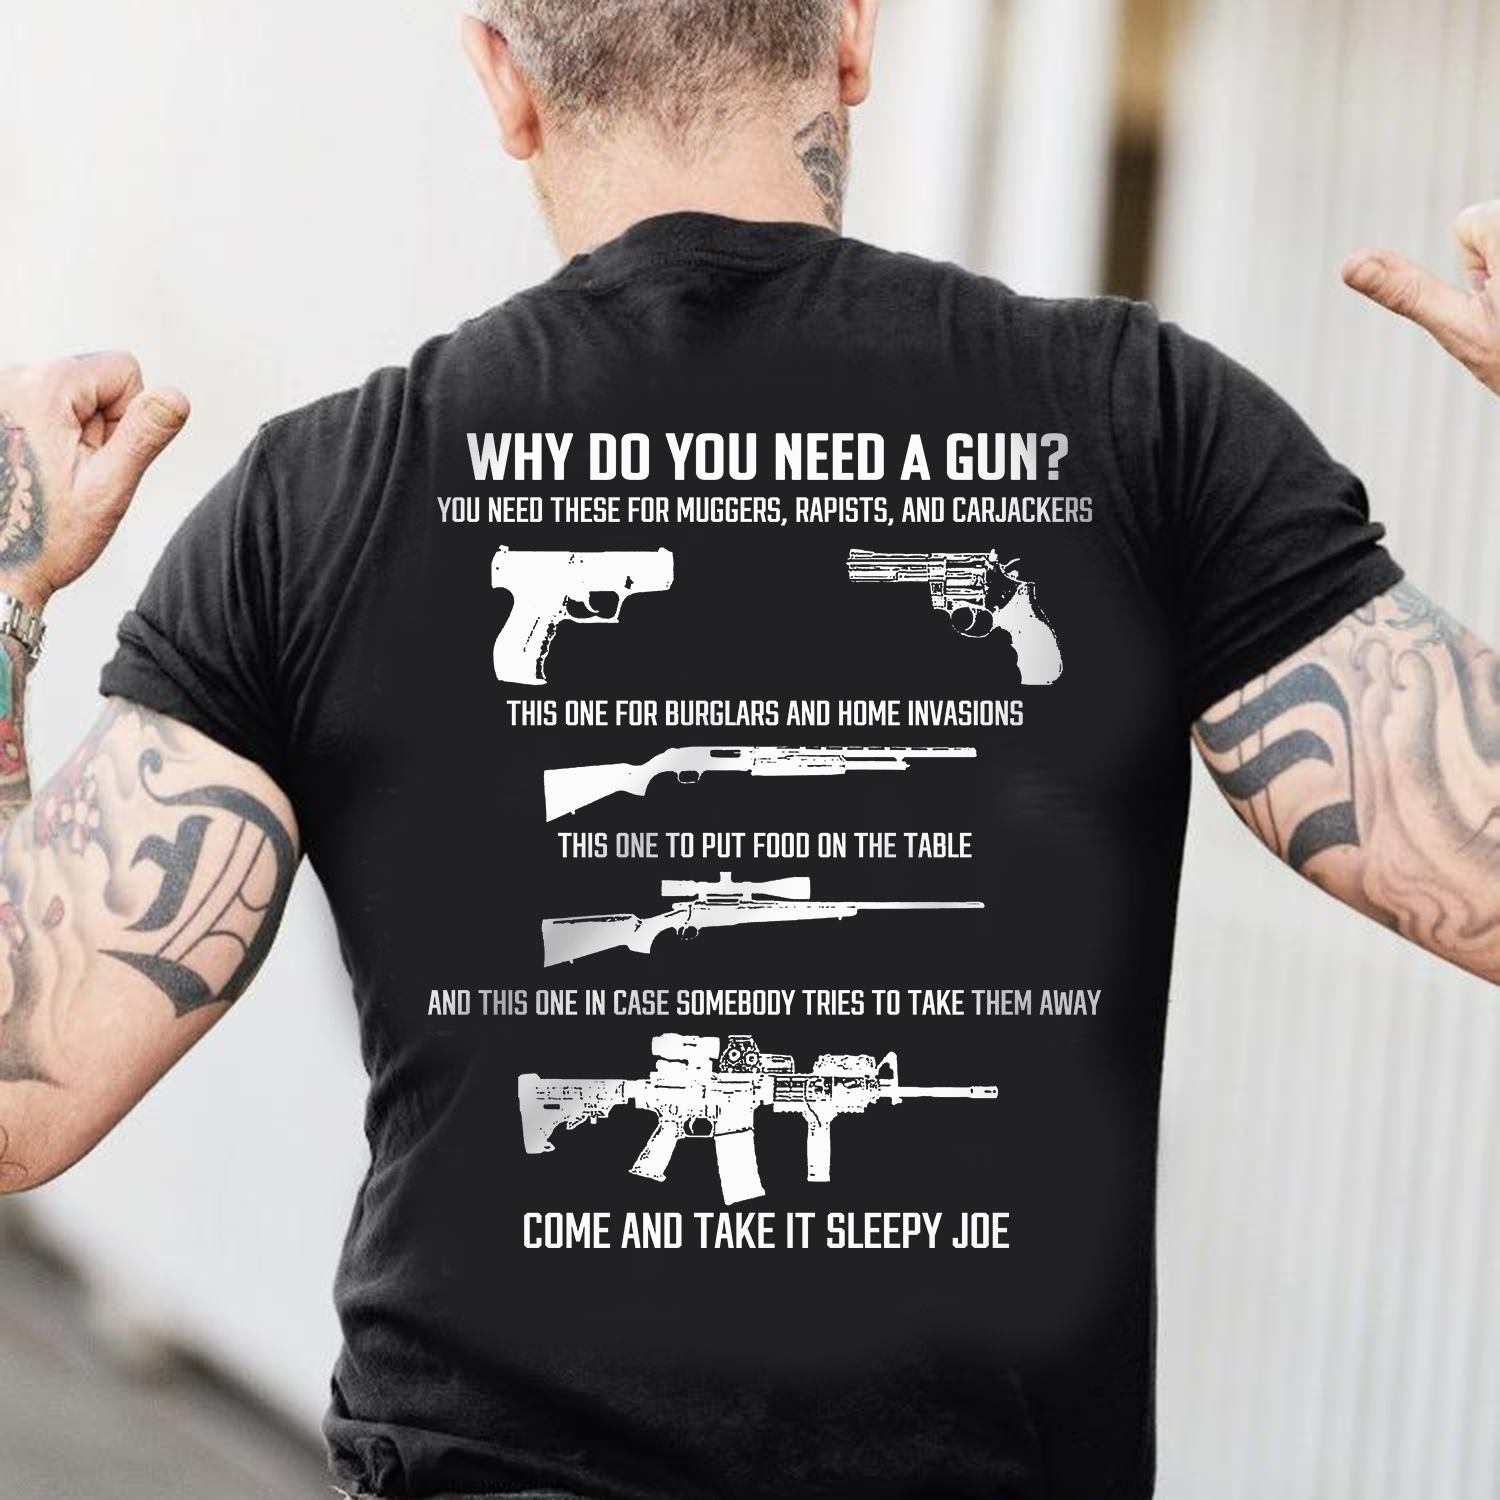 Why do you need a gun For muggers rapists, for burglars and home invasions, to put food on the table